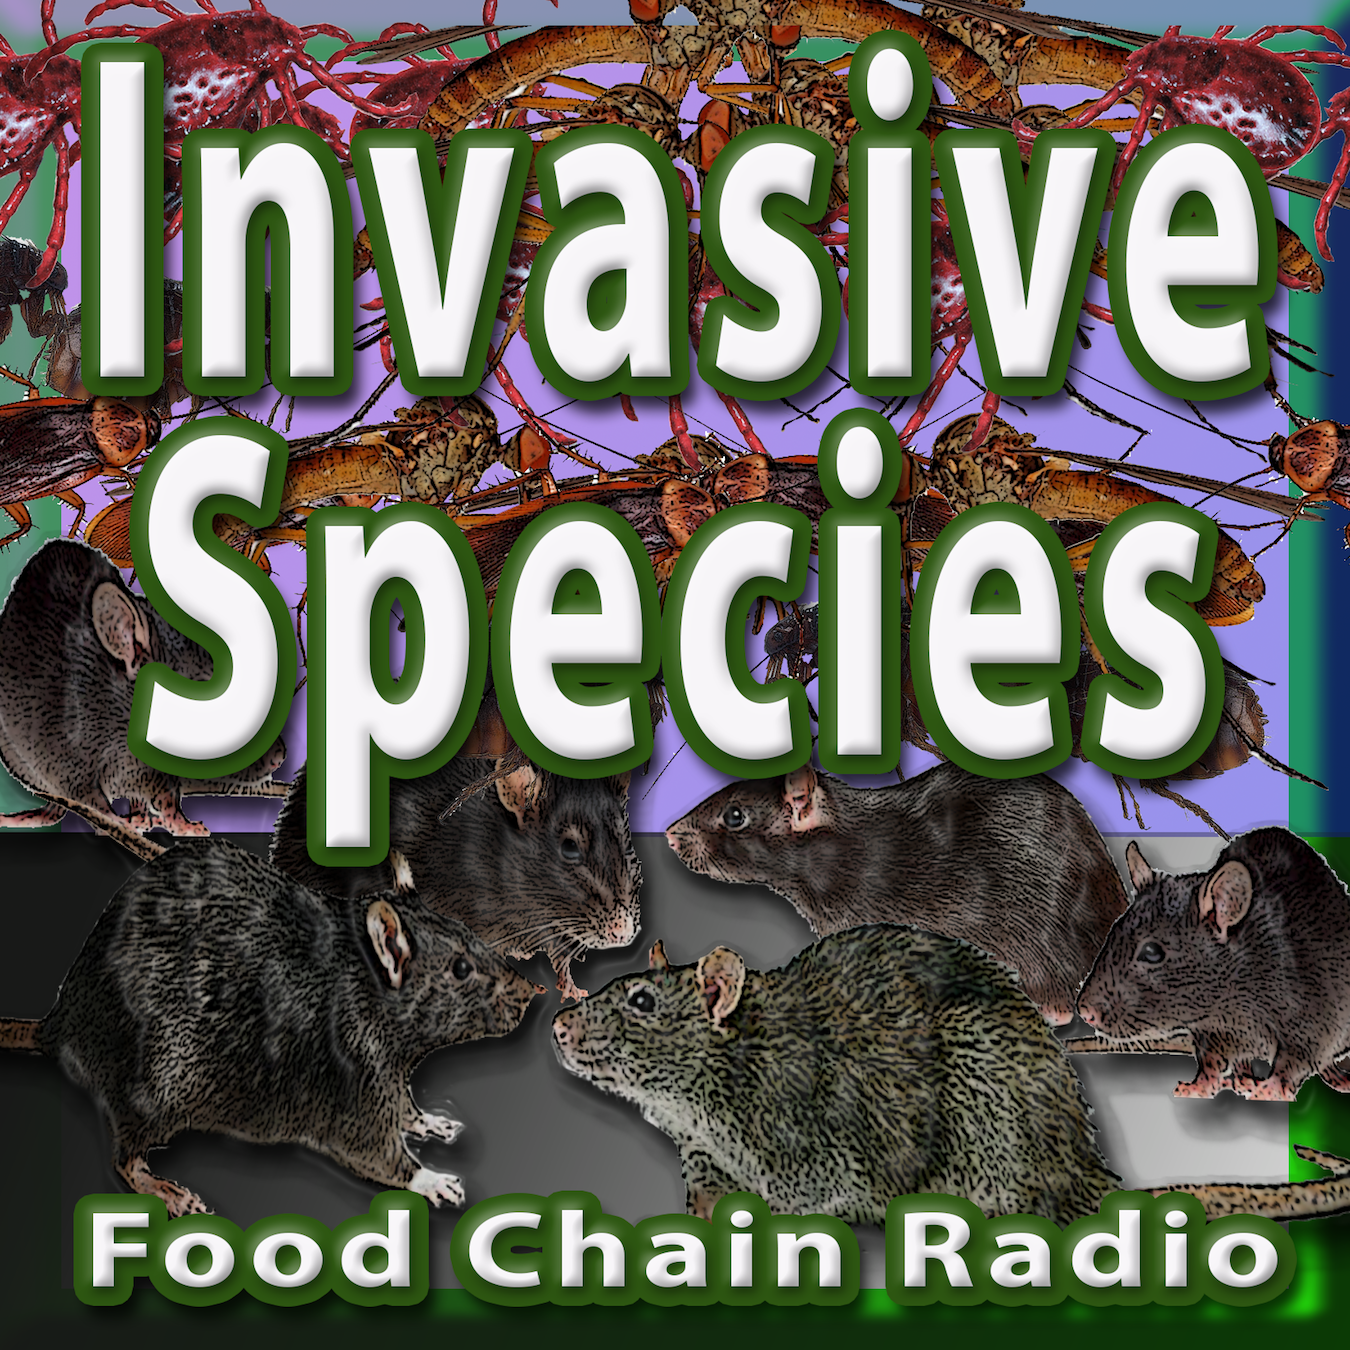 Michael Olson Food Chain Radio – Should invasive species be eliminated or allowed to grow?